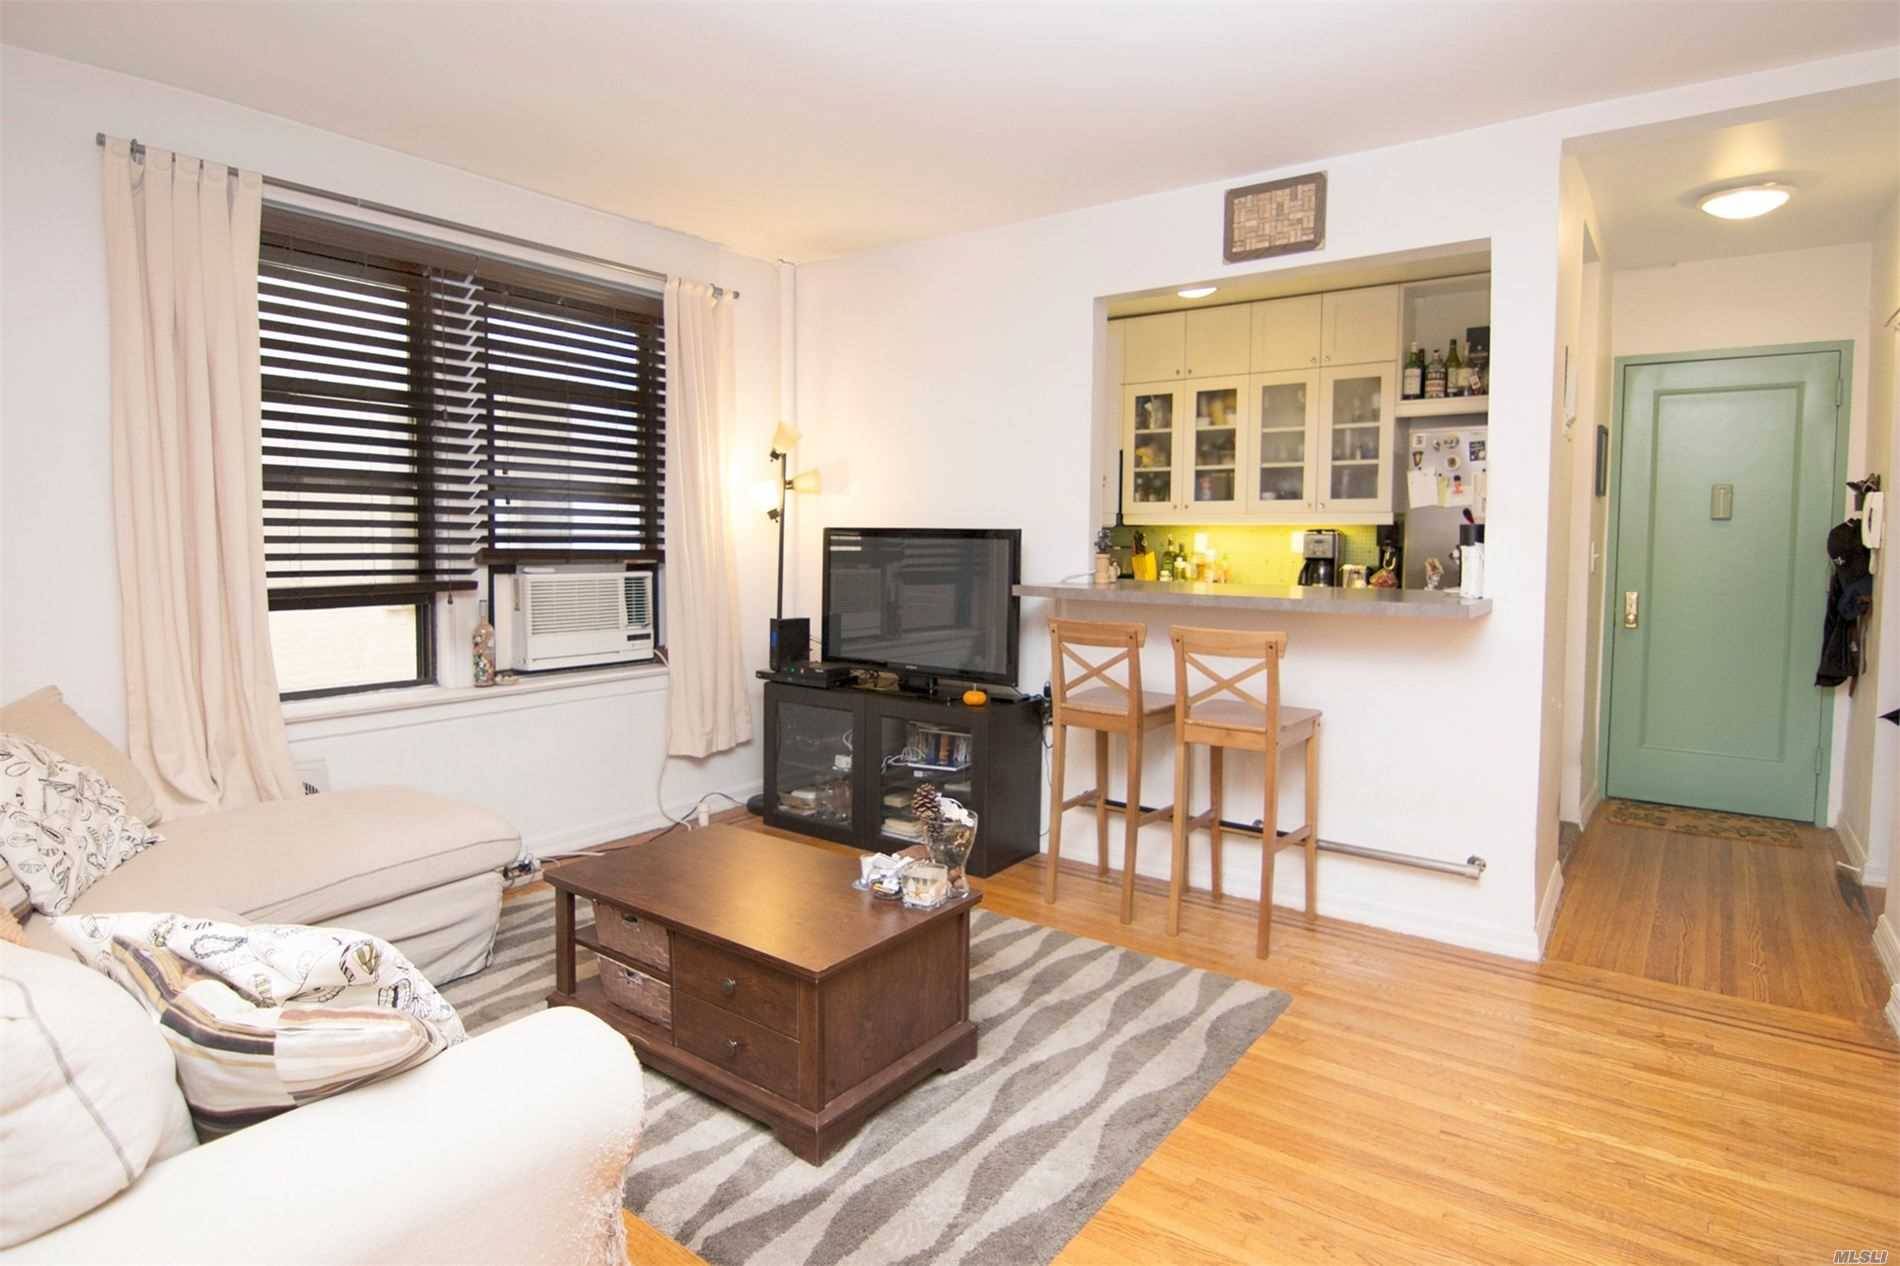 One bedroom just listed at the Paul Revere Co op.